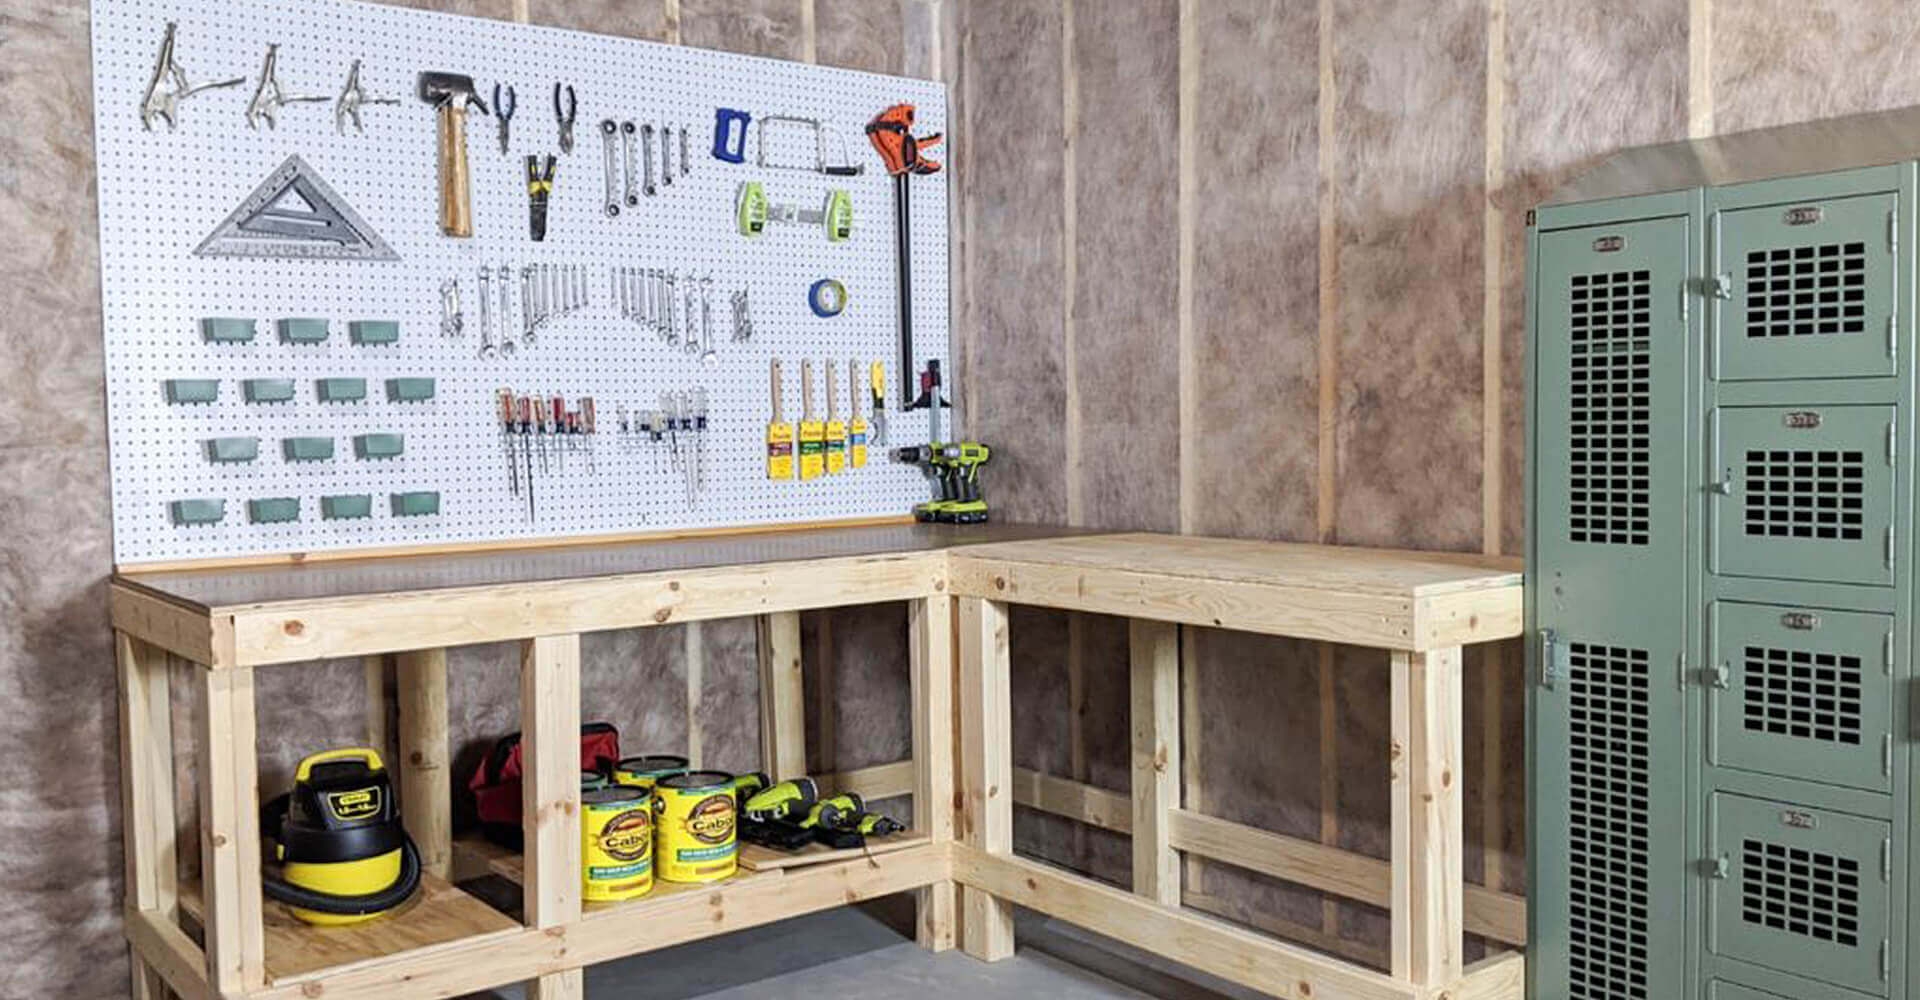 DIY Hardware Organizer - Workshop Solutions Projects, Tips and Tricks, WoodArchivist.com